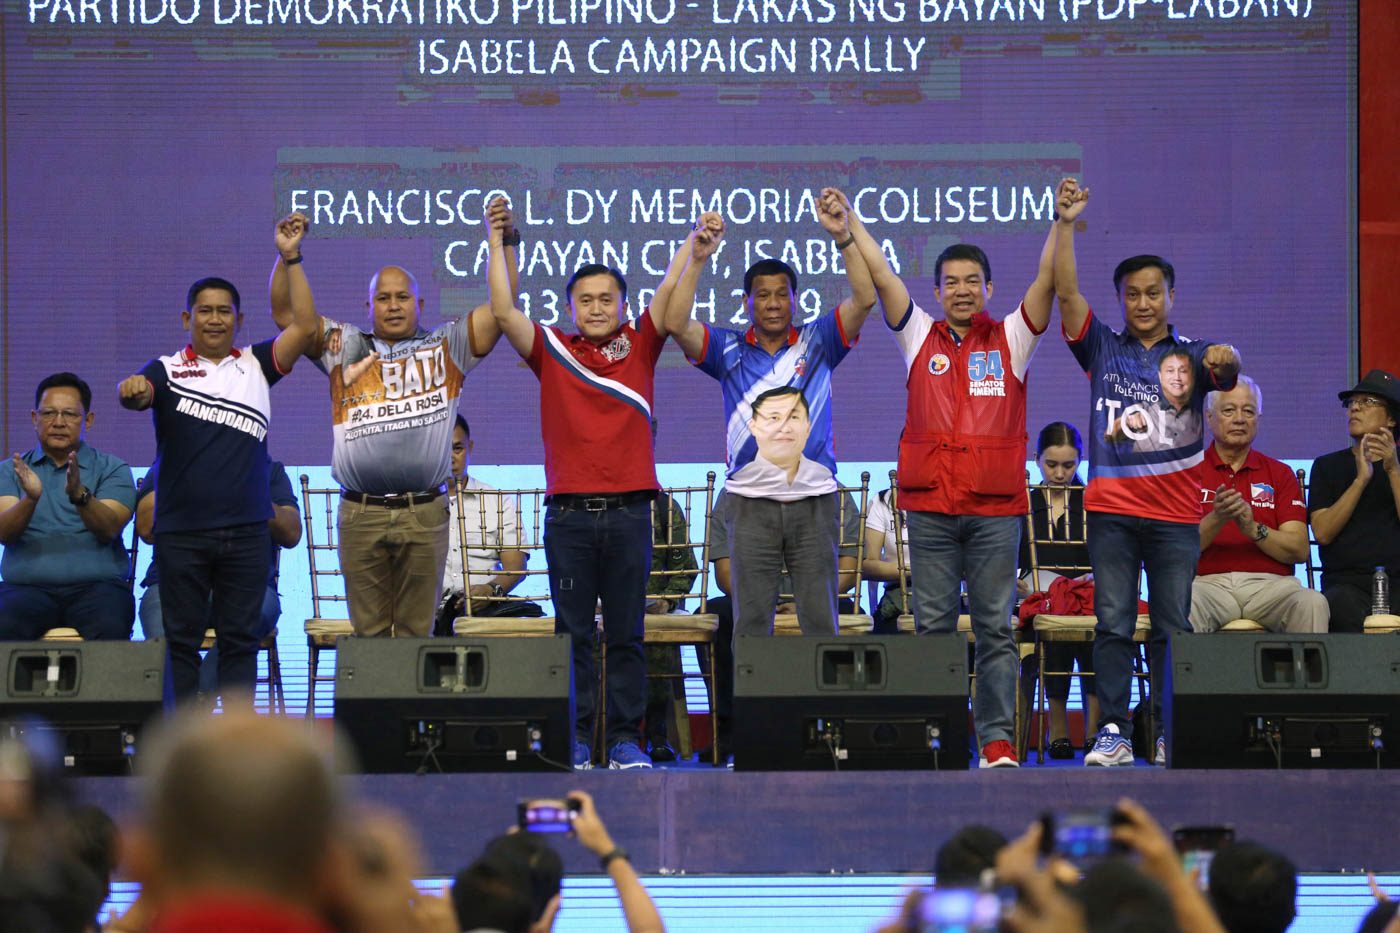 At Isabela rally, Bong Go introduces Duterte as ‘one of my campaign managers’